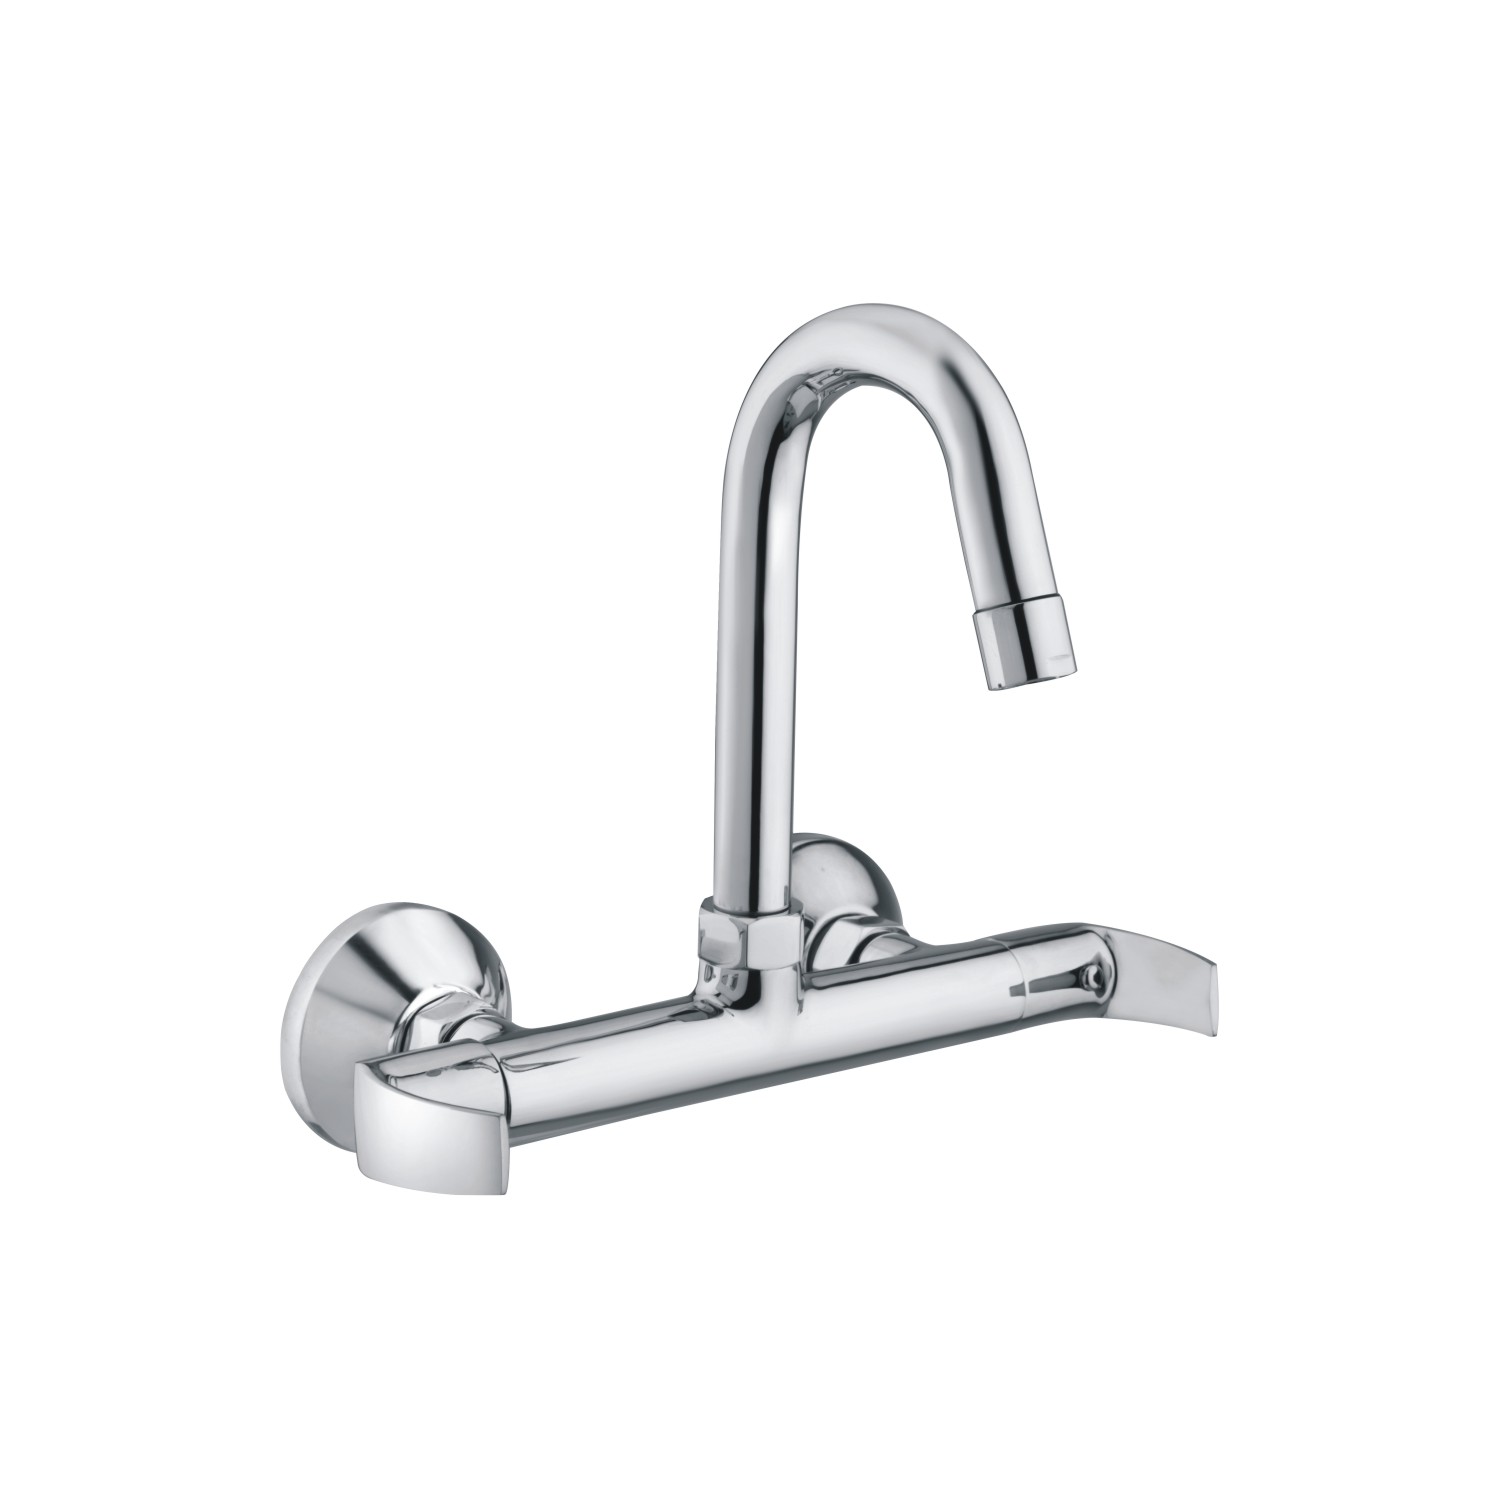 Quink Sink Mixer with Swivel Spout